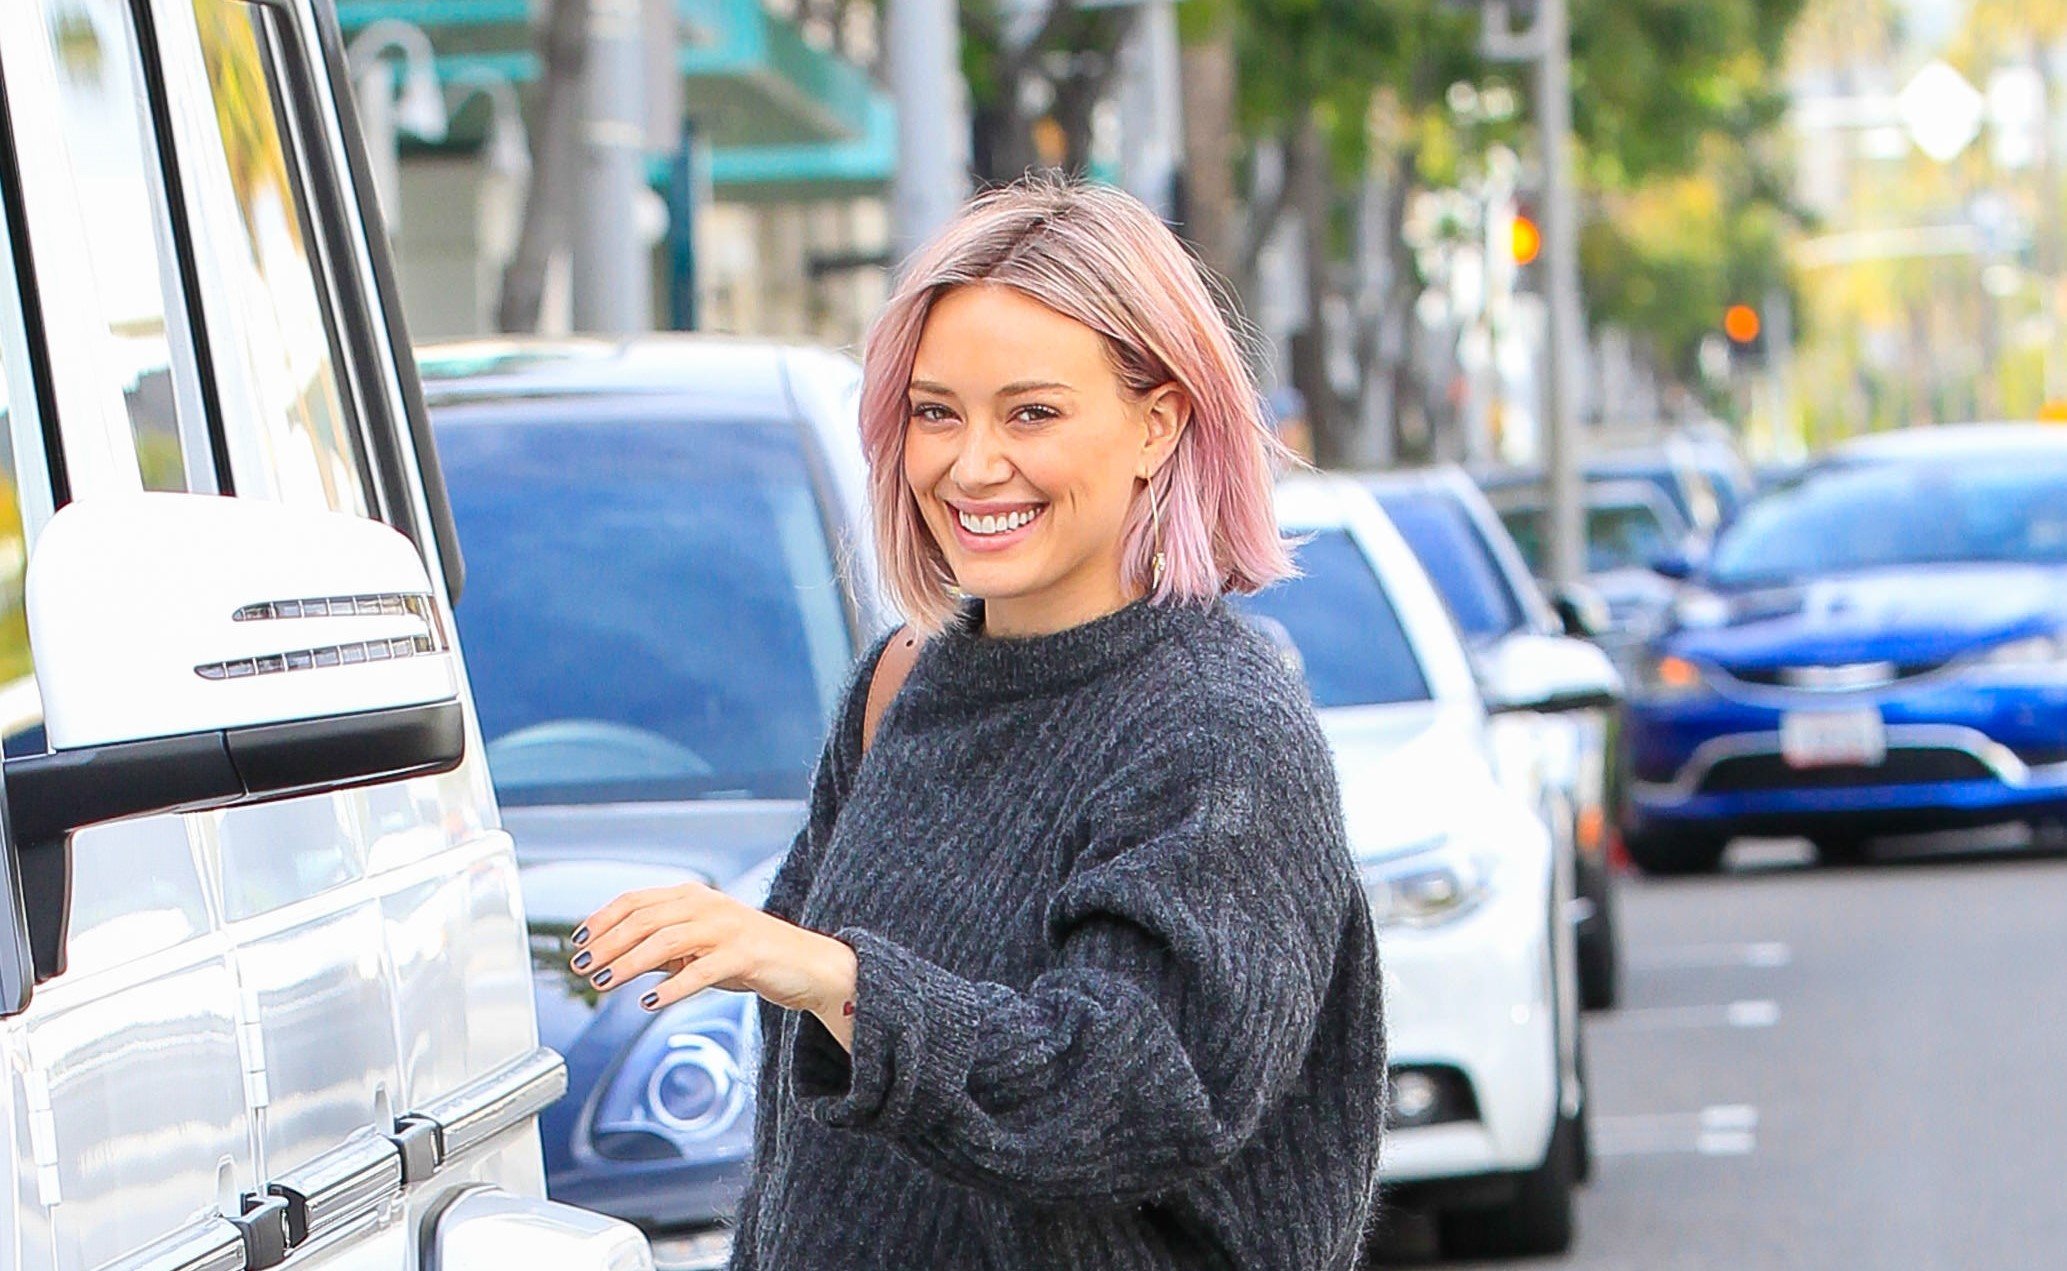 Hilary Duff is seen on January 22, 2016 in Los Angeles, California. | Source: Getty Images